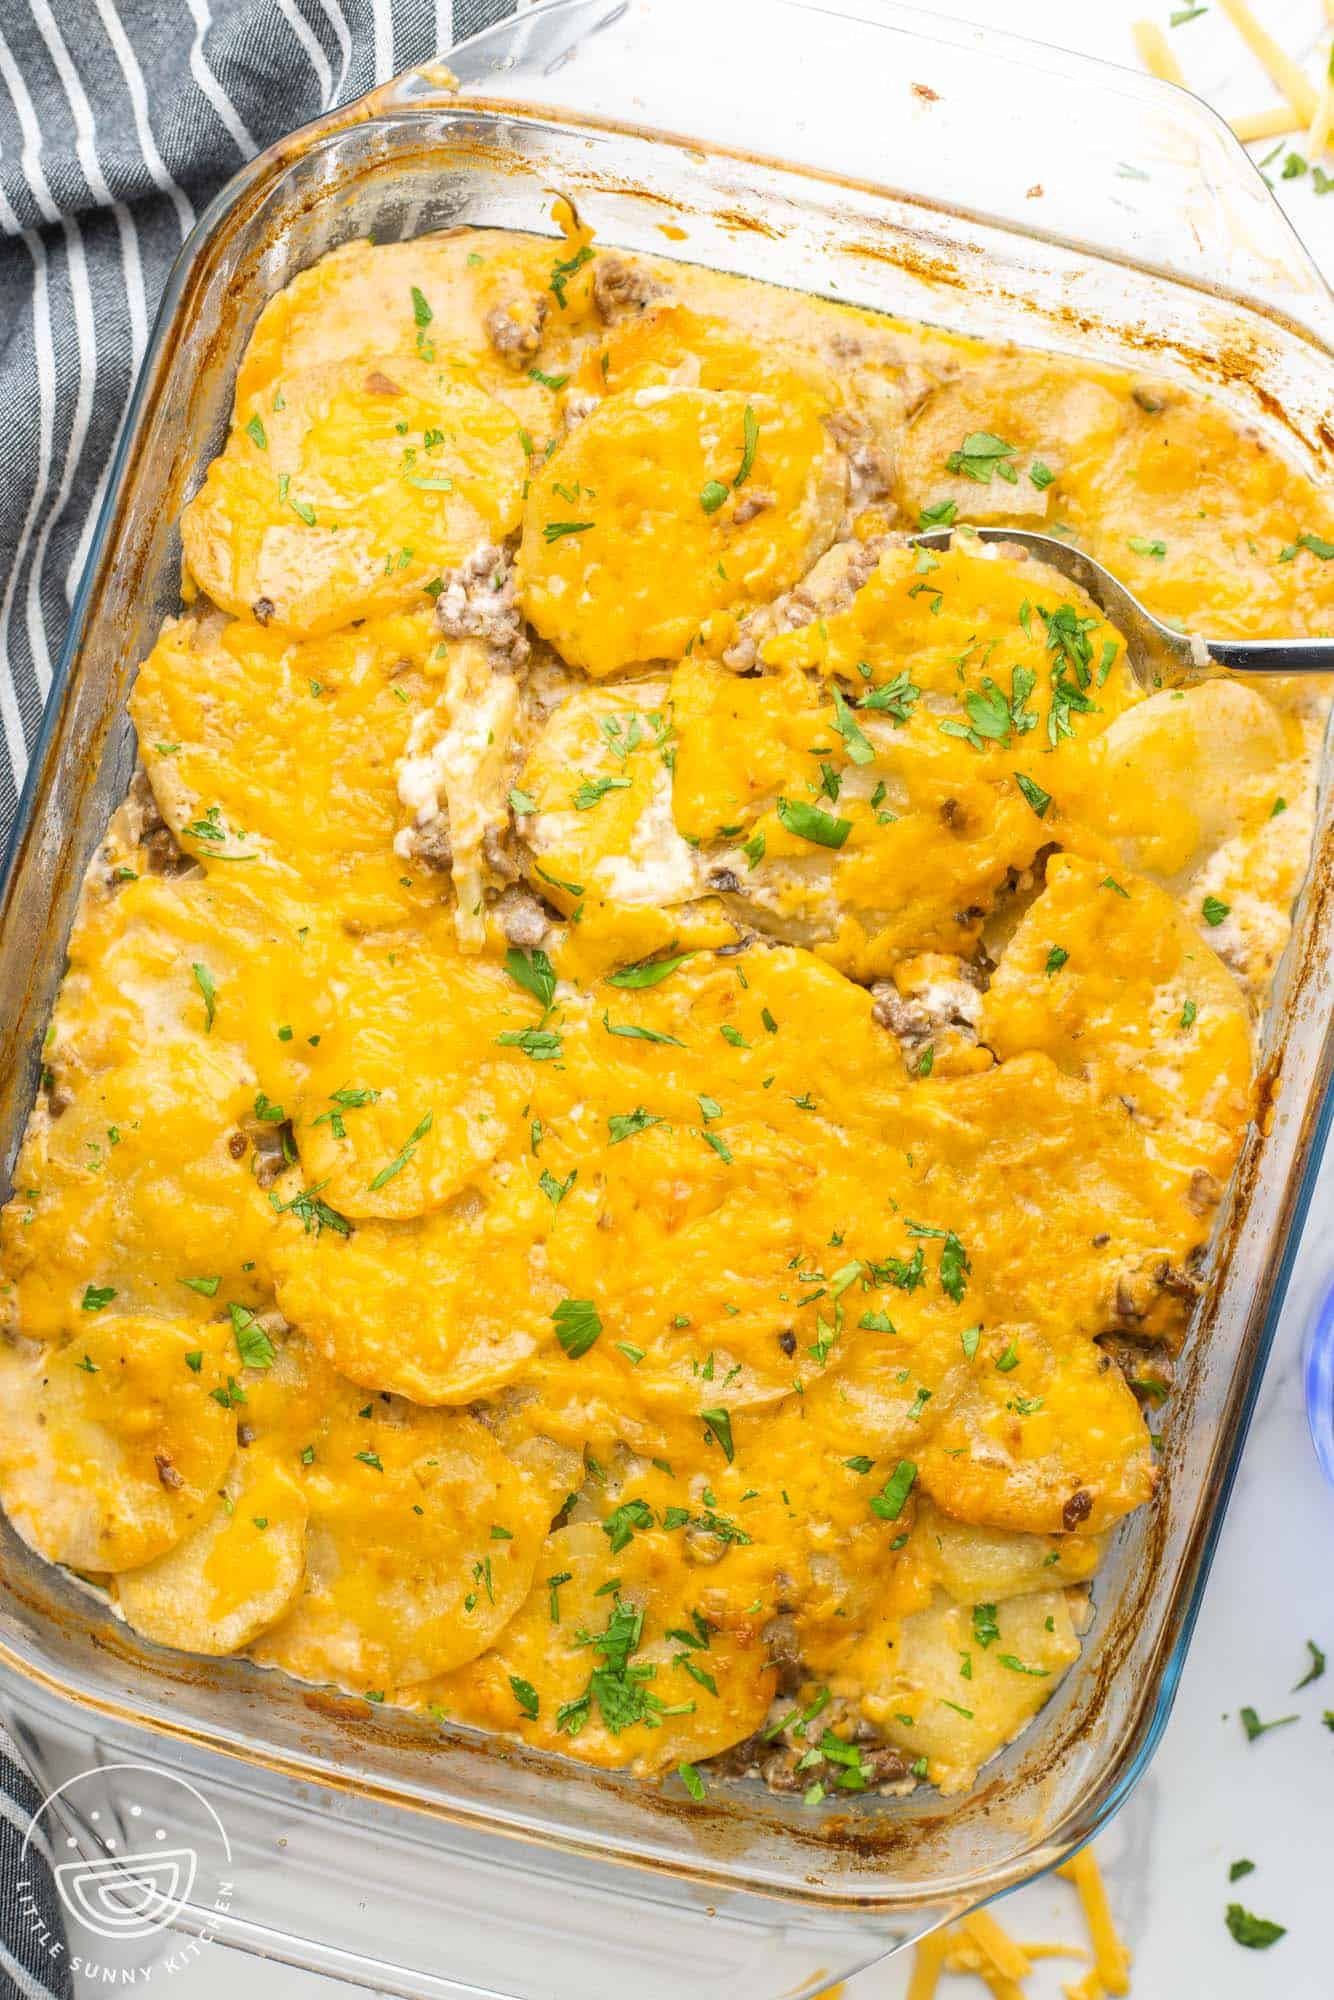 a glass 9x13 inch baking dish filled with potato and hamburger casserole, topped with melted cheese and fresh parsley.